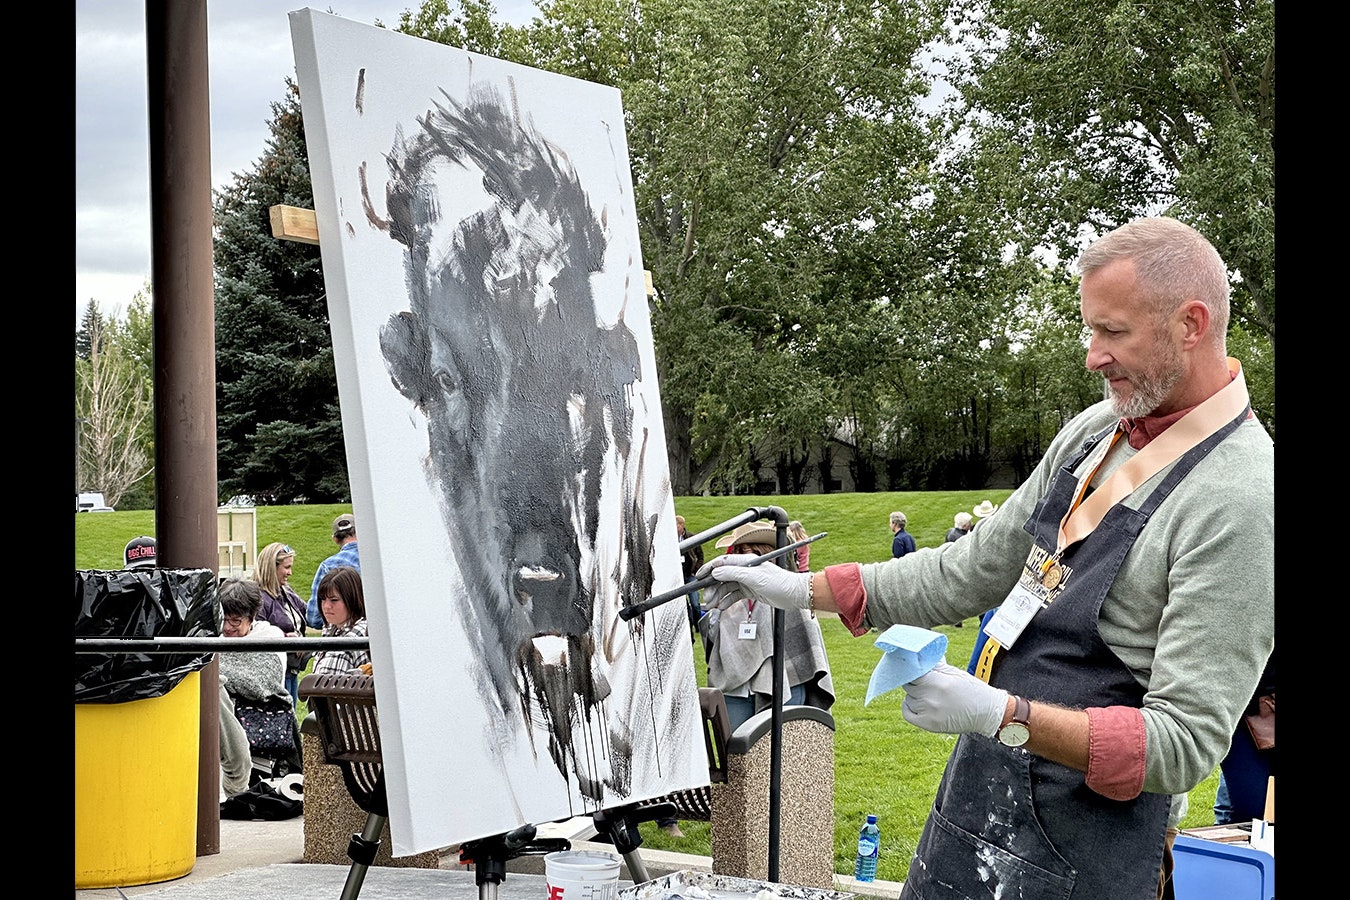 David Frederick Riley paints "American Dream" during the 42nd Buffalo Bill Art Show and Sale Quick Draw. The painting won the People's Choice Award for the Quick Draw and was the highest-selling piece at the morning's live auction.